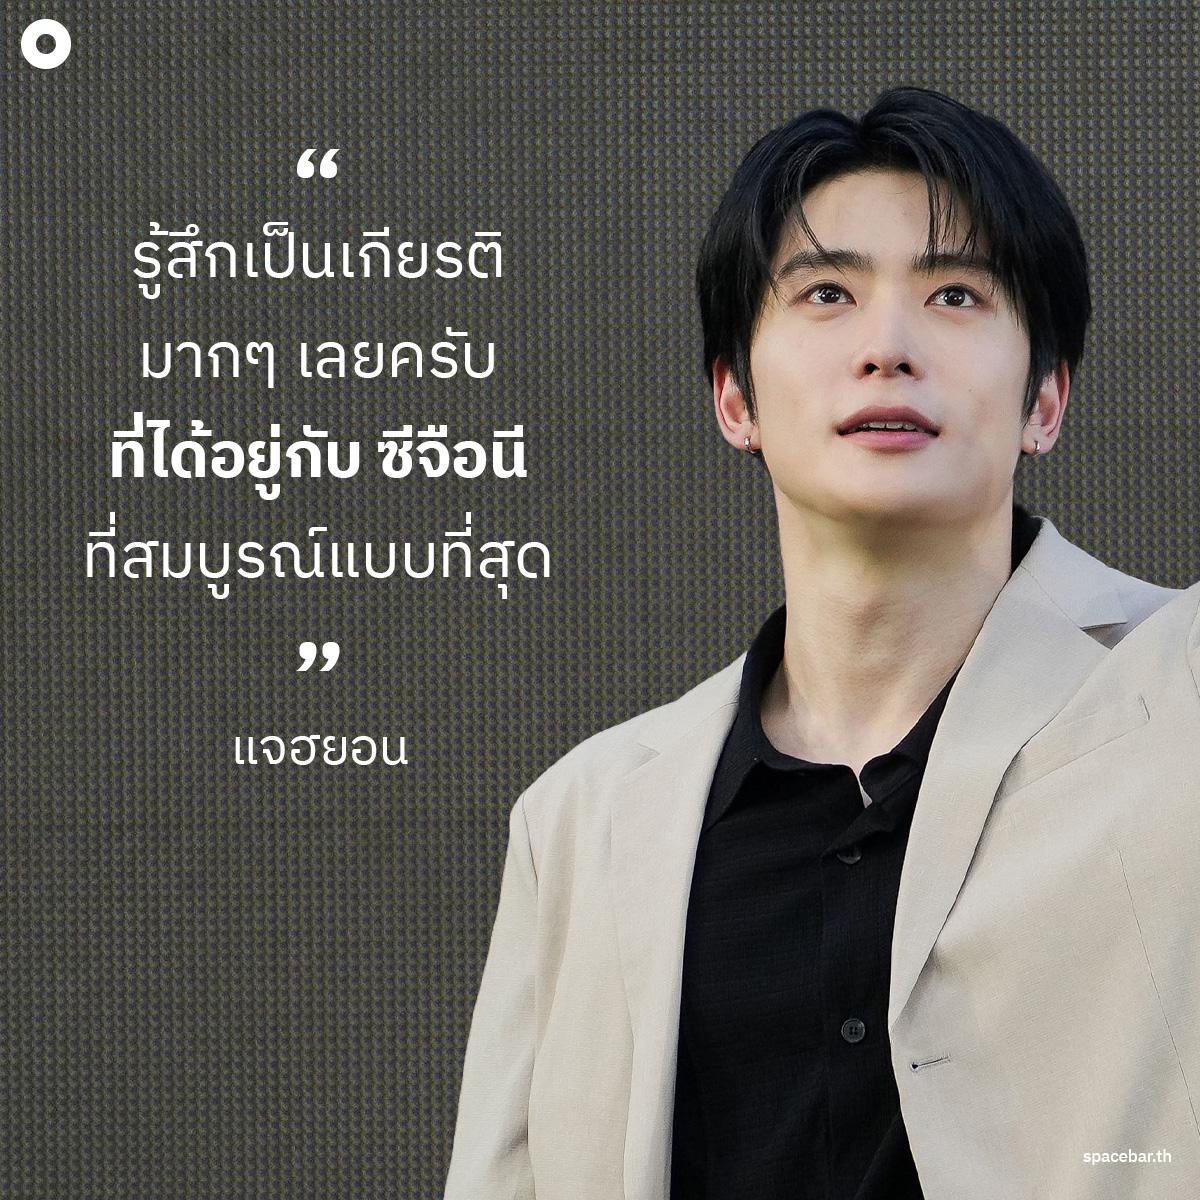 https://images.ctfassets.net/i3o8p9lzd06f/43AfPenGojZSt5dRHoDtTe/3eb1b1cc421174dfba0893f84ed8d17a/THINK-THING-NCT-DOJAEJUNG-QUOTE-SPACEBAR-Photo01